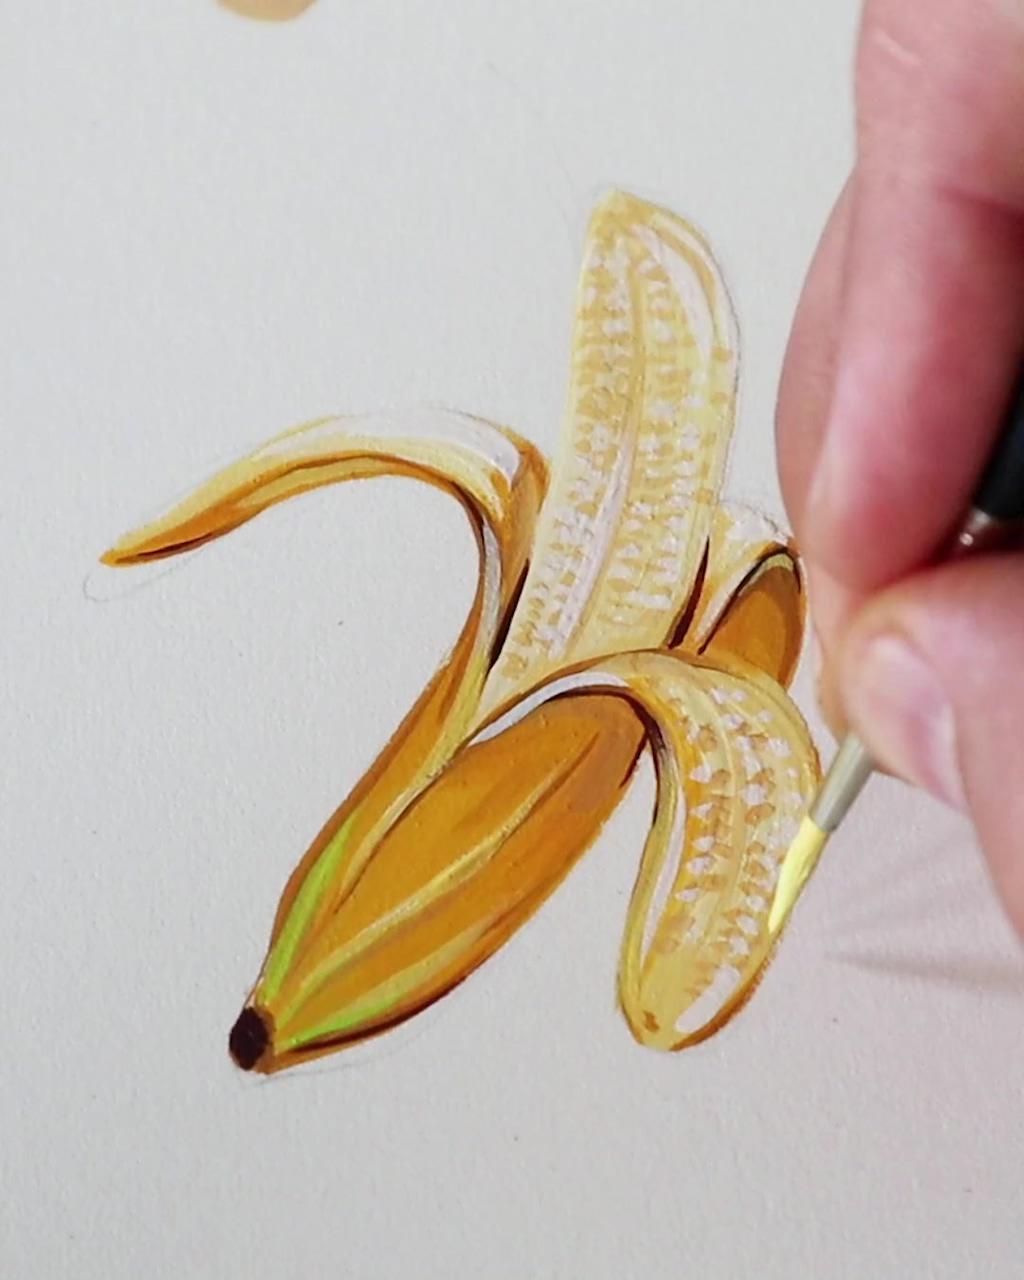  painting a banana by philip boelter; fruit painting